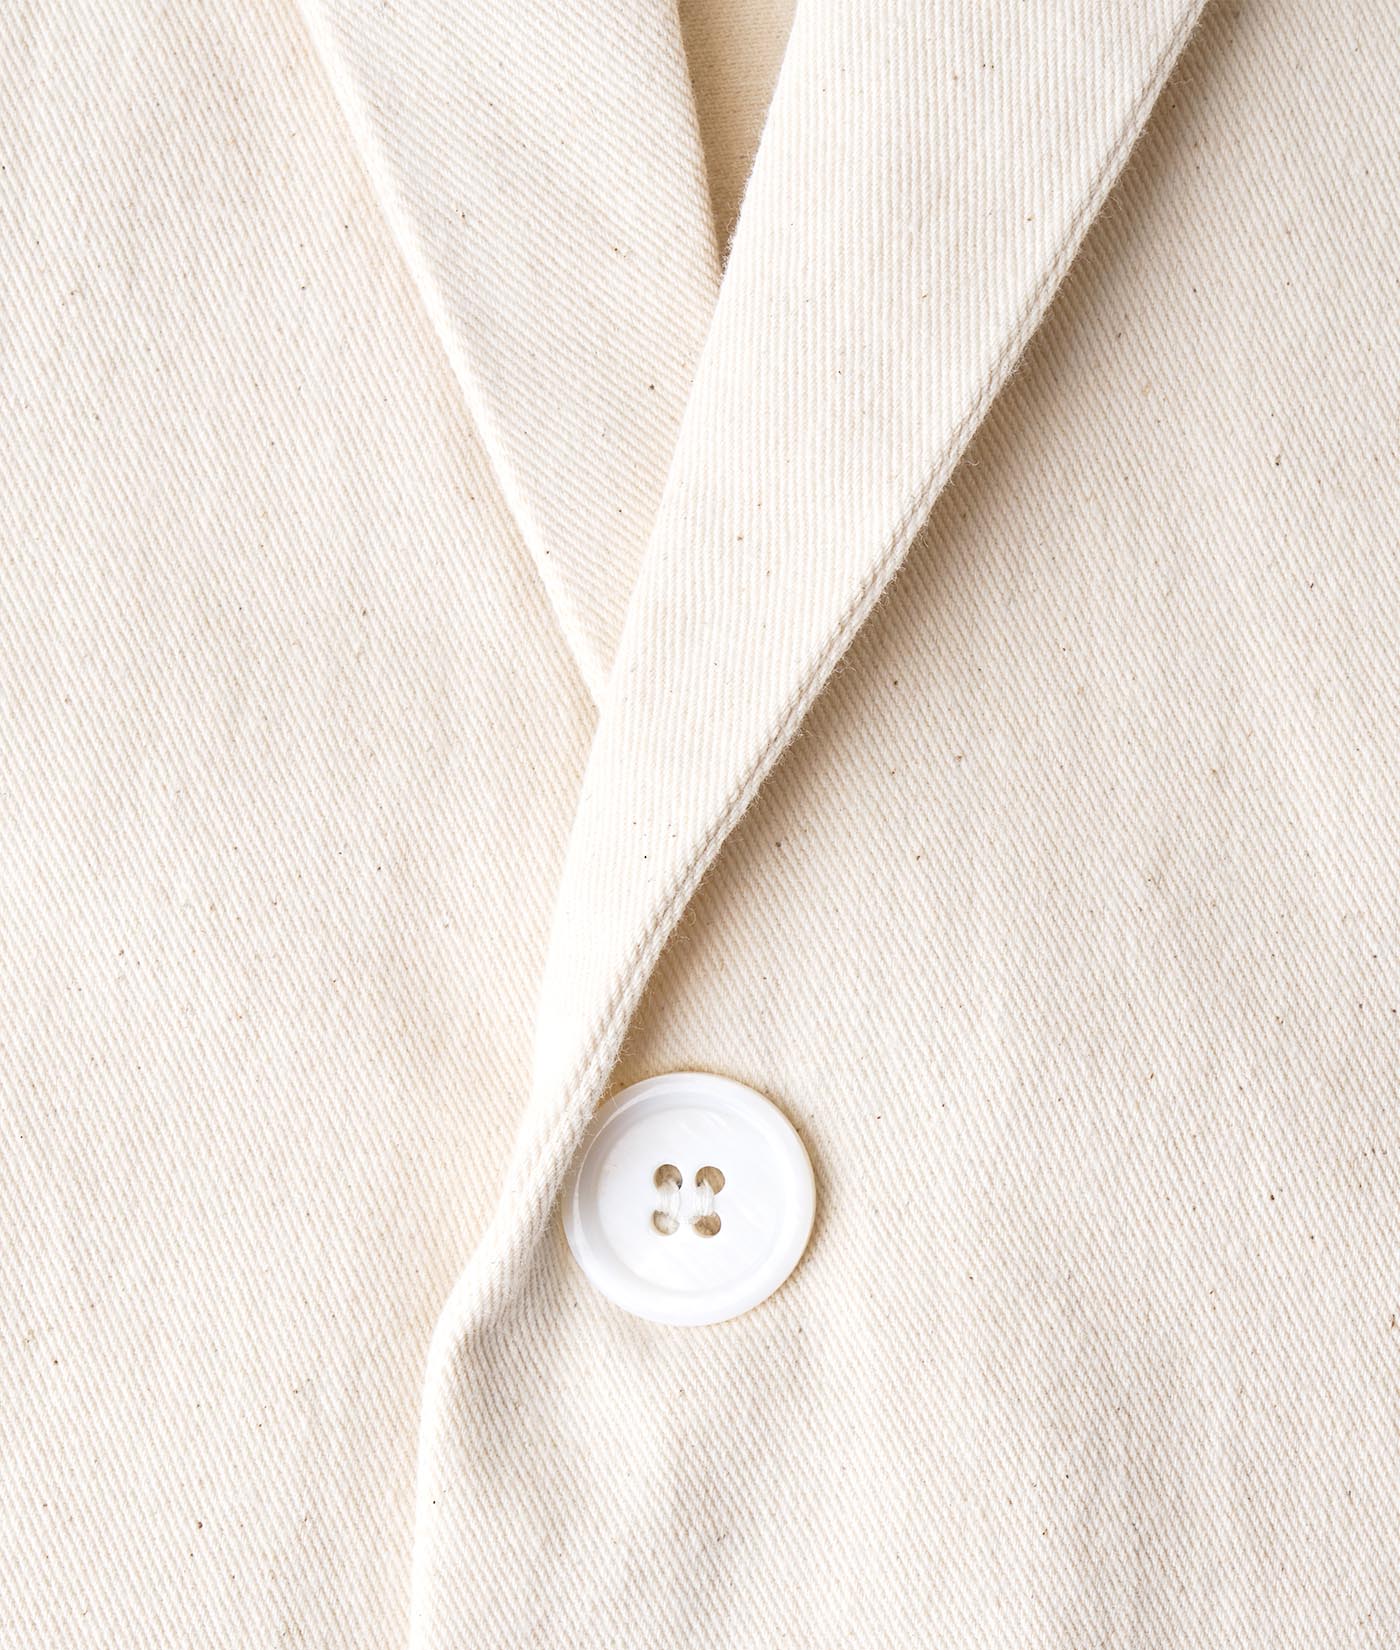 Industry of All Nations Clean Blazer, Undyed